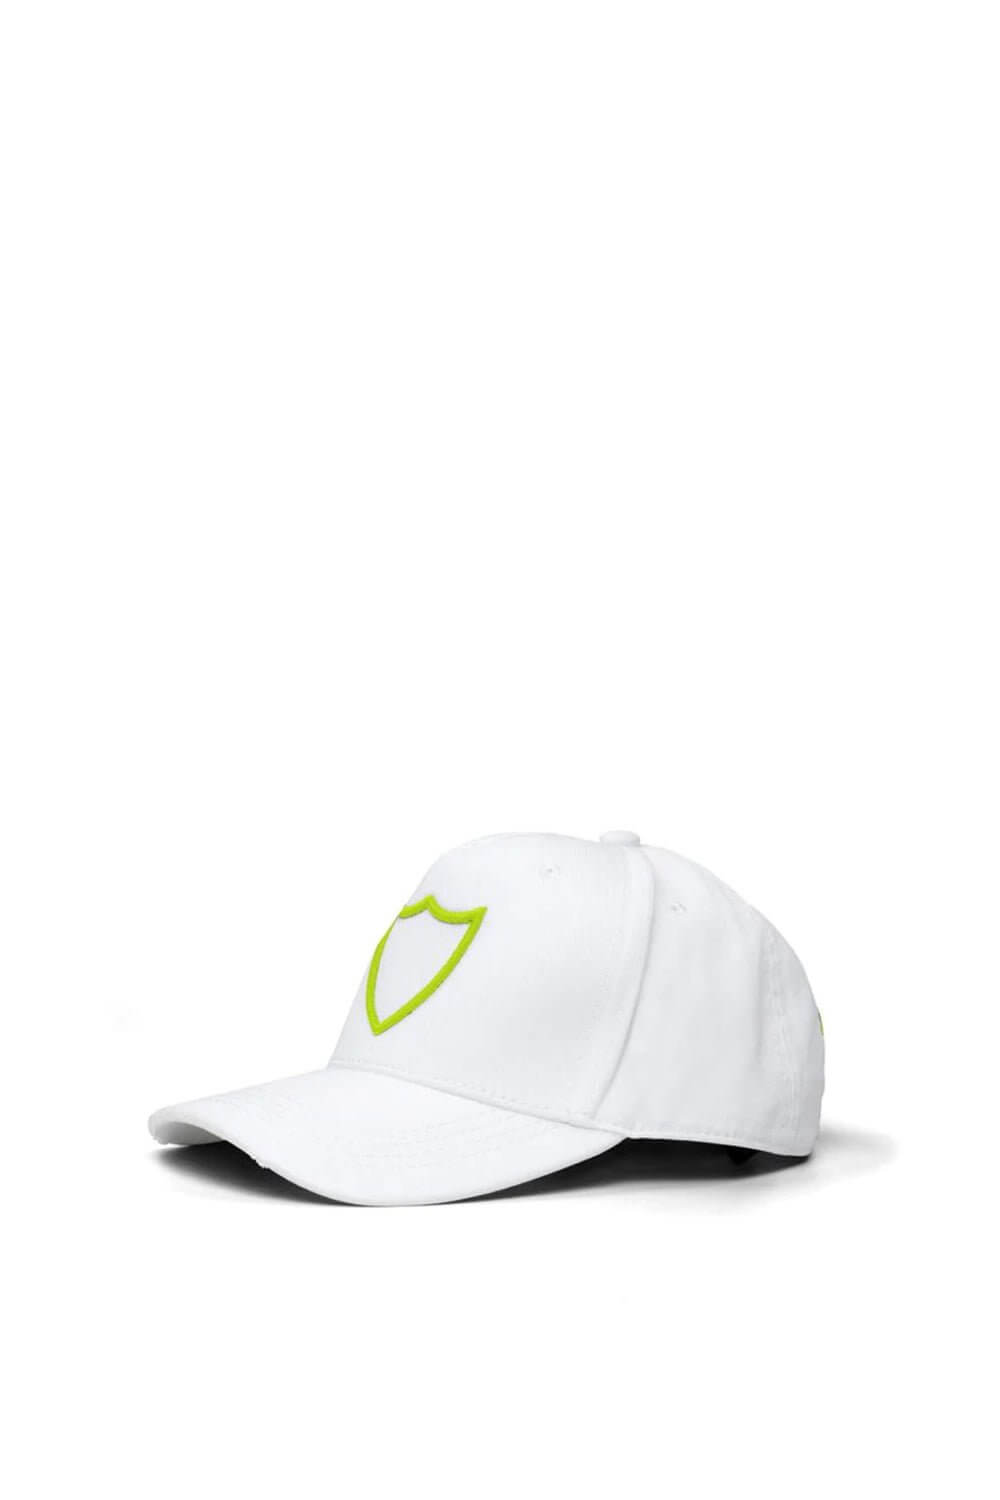 HTC LOGO BASEBALL CAP White baseball cap with preformed peak, round crown with eyelets, fluo yellow HTC Los Angeles shield logo embroidered on the front, adjustable strap on the back. One size fits all. 100% cotton. HTC LOS ANGELES